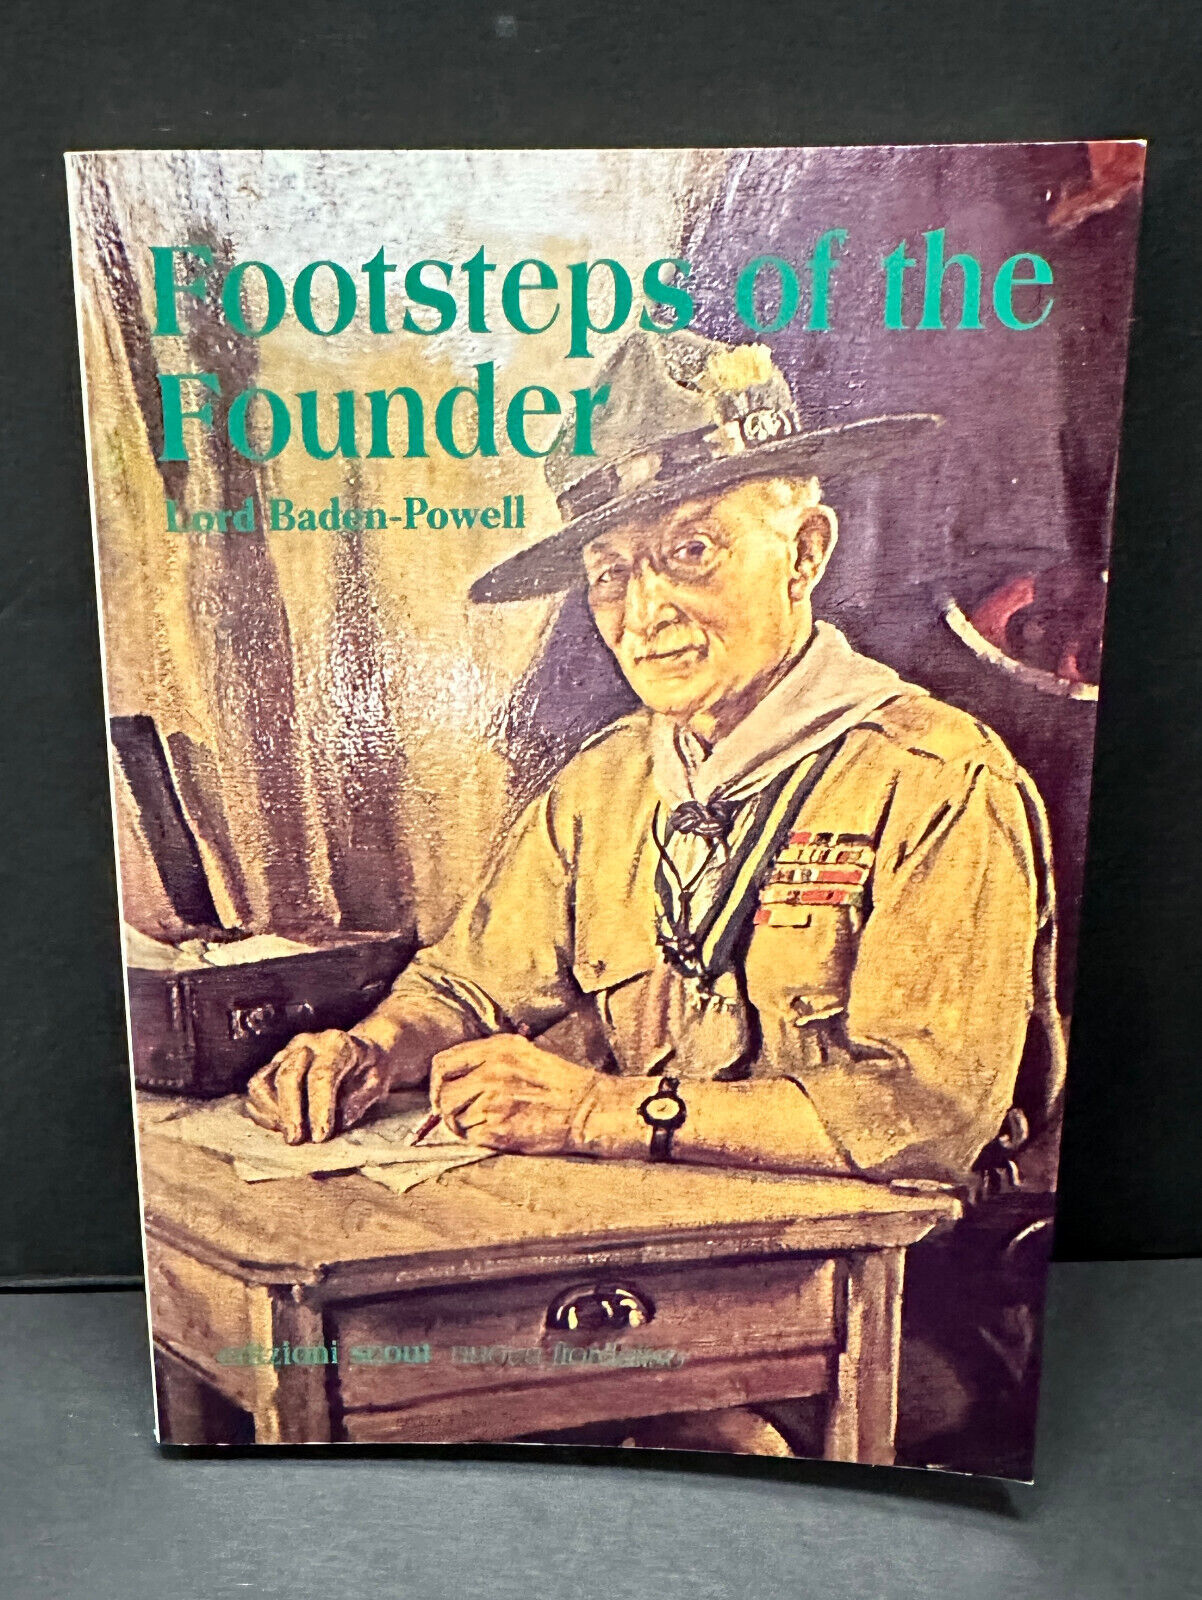 Footsteps of the Founder (2002) | Robert Baden-Powell | Soft Cover